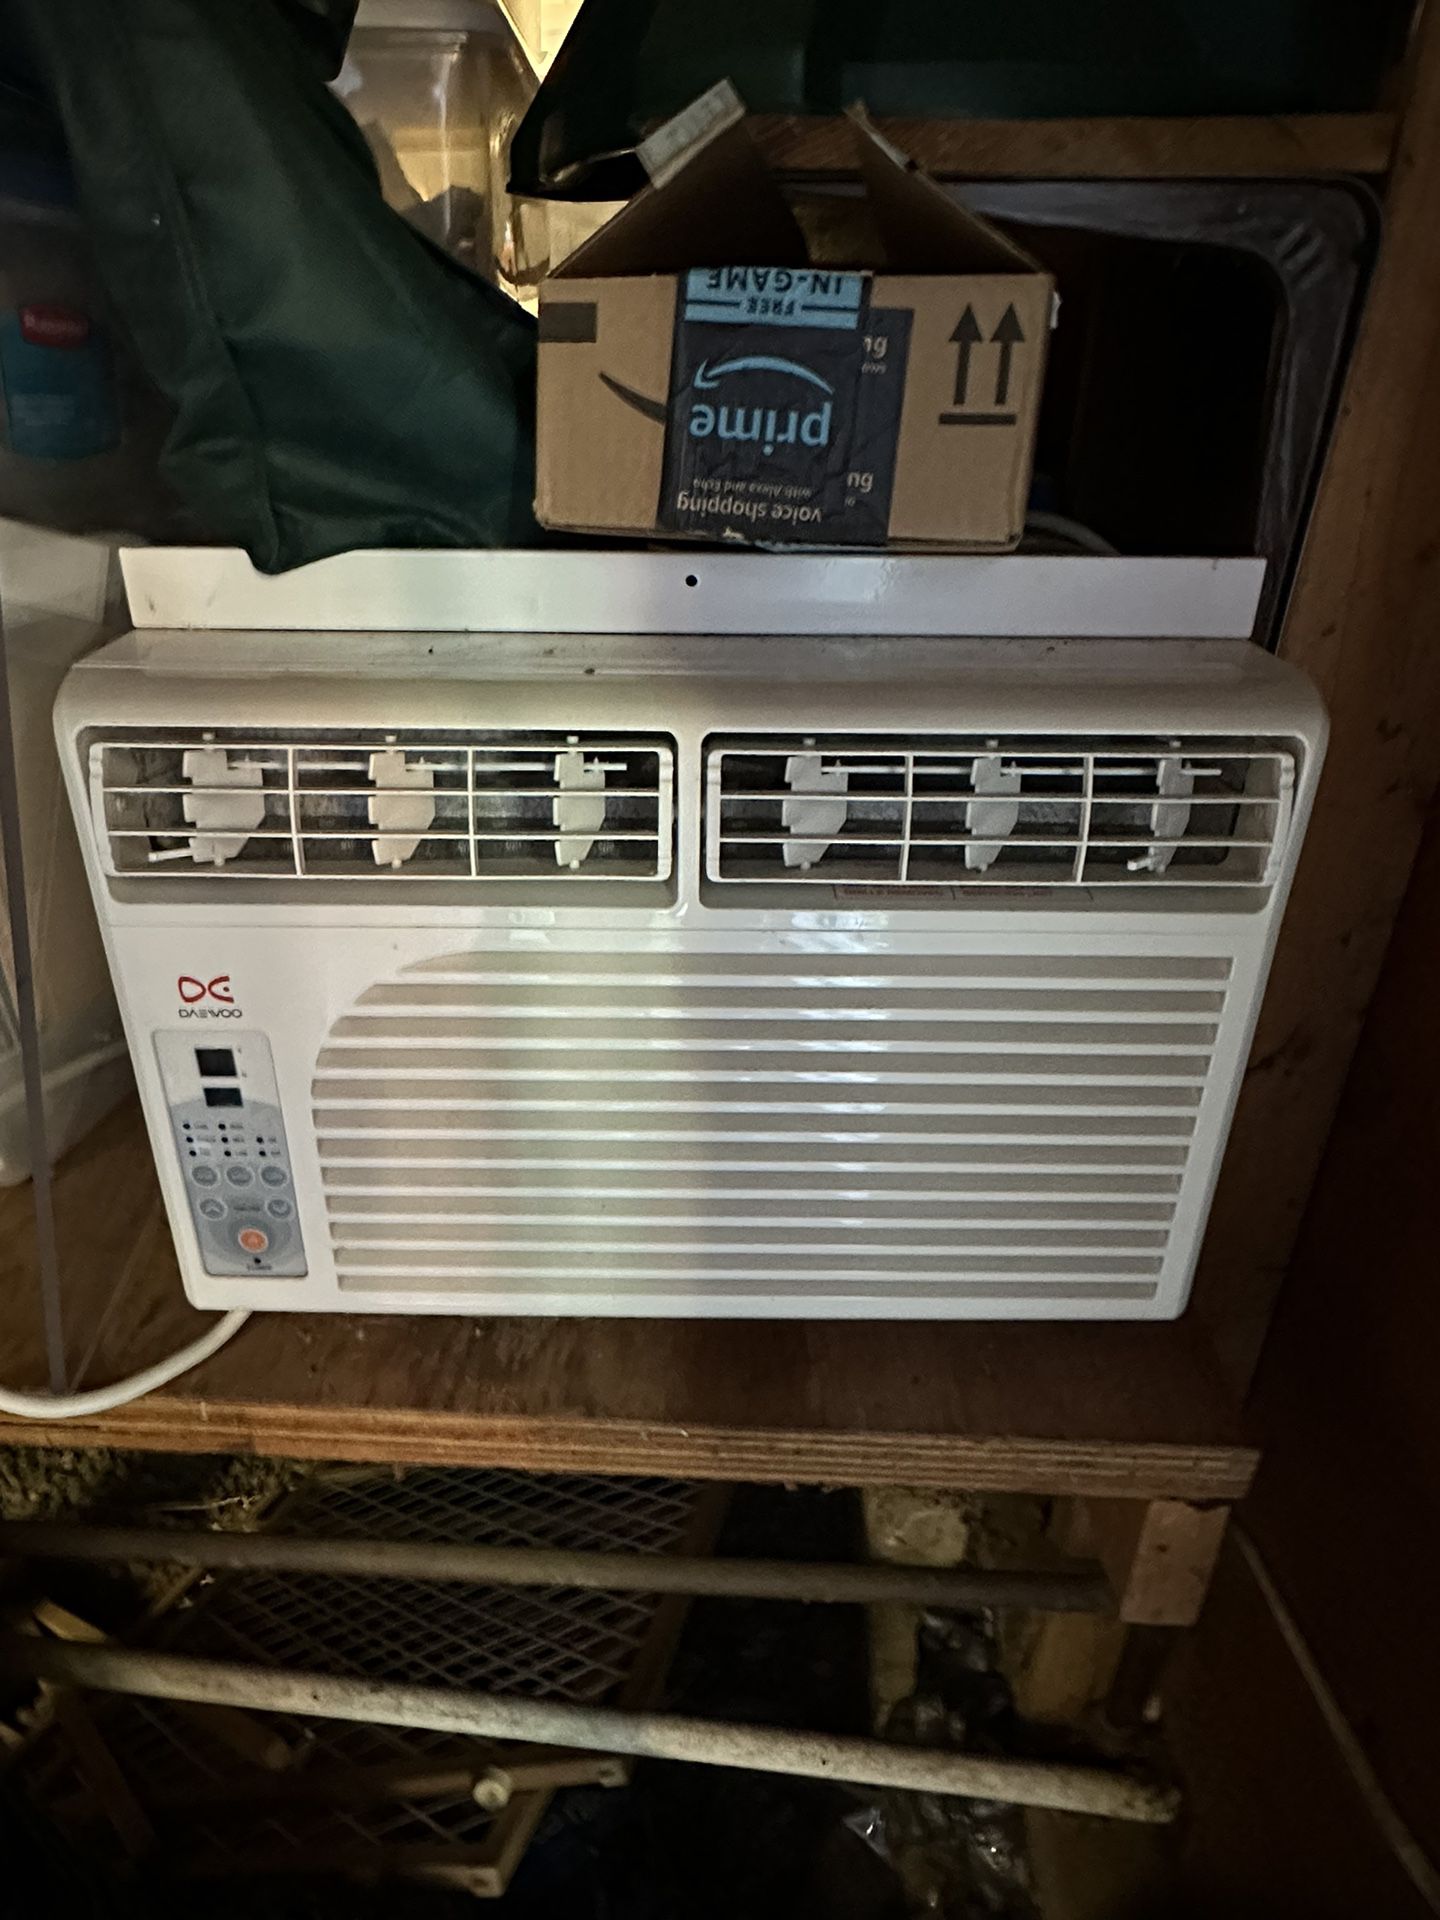 A/C Unit With Remote 